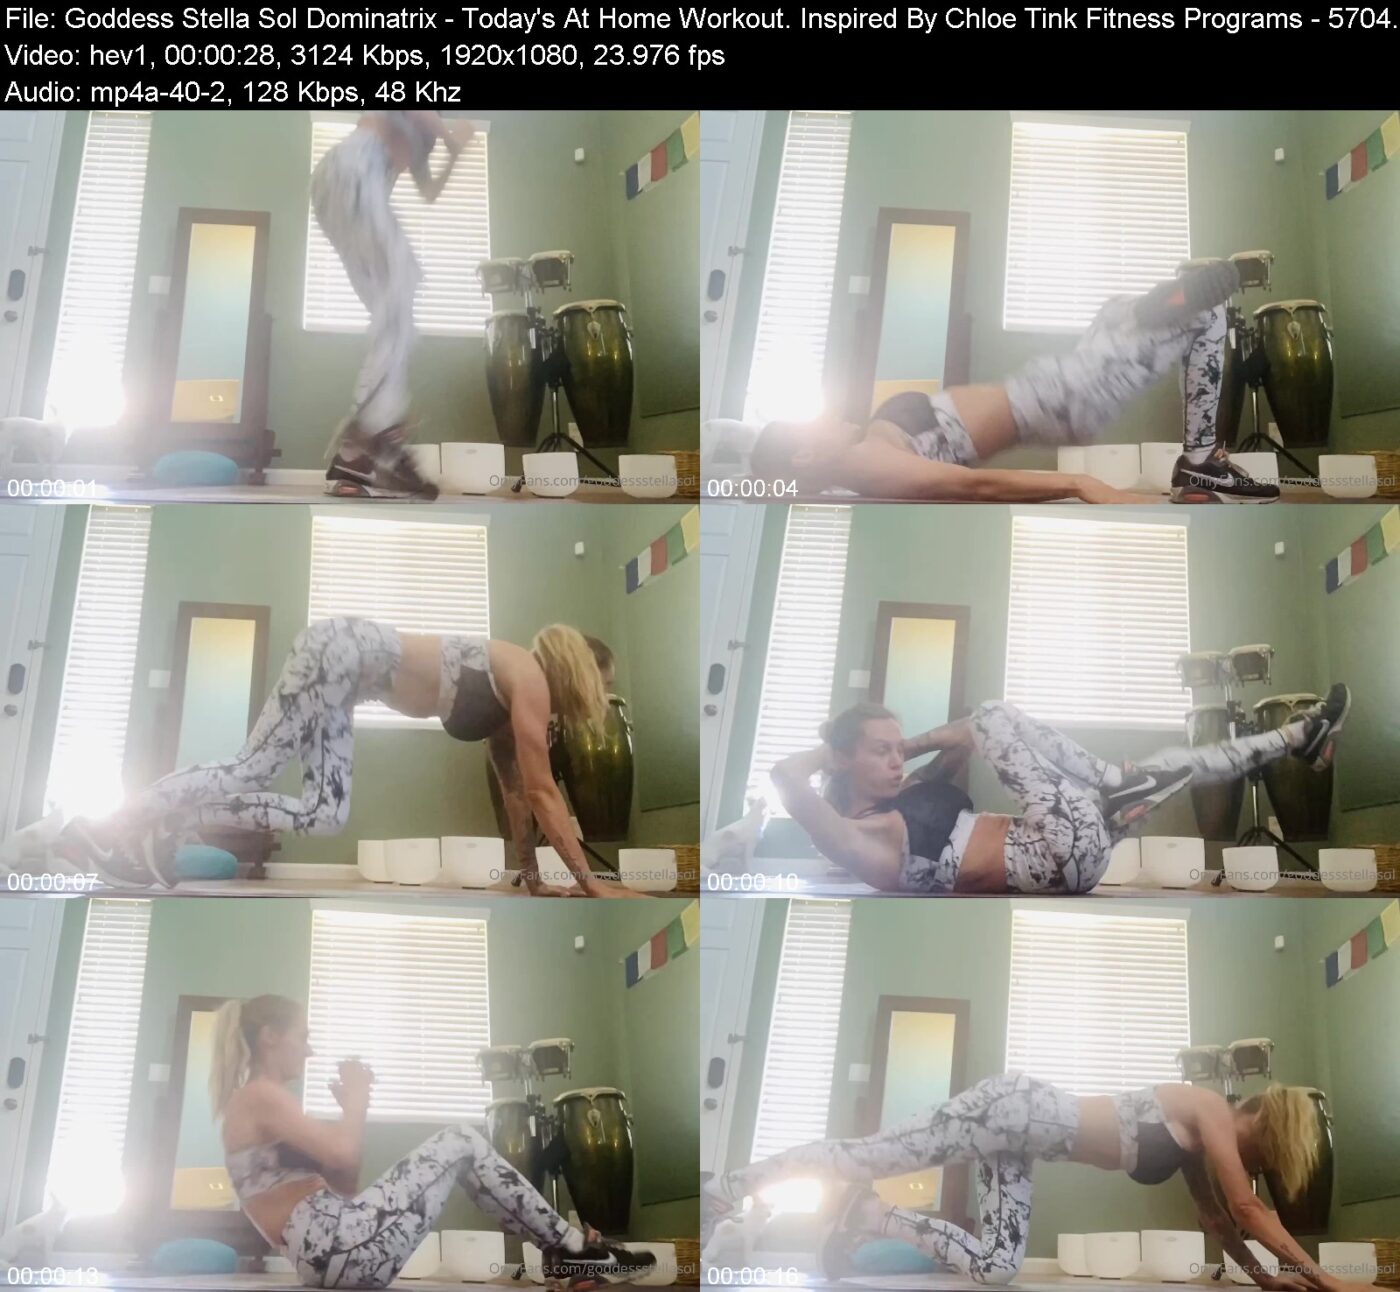 Actress: Goddess Stella Sol Dominatrix. Title and Studio: Today’s At Home Workout. Inspired By Chloe Tink Fitness Programs – 5704